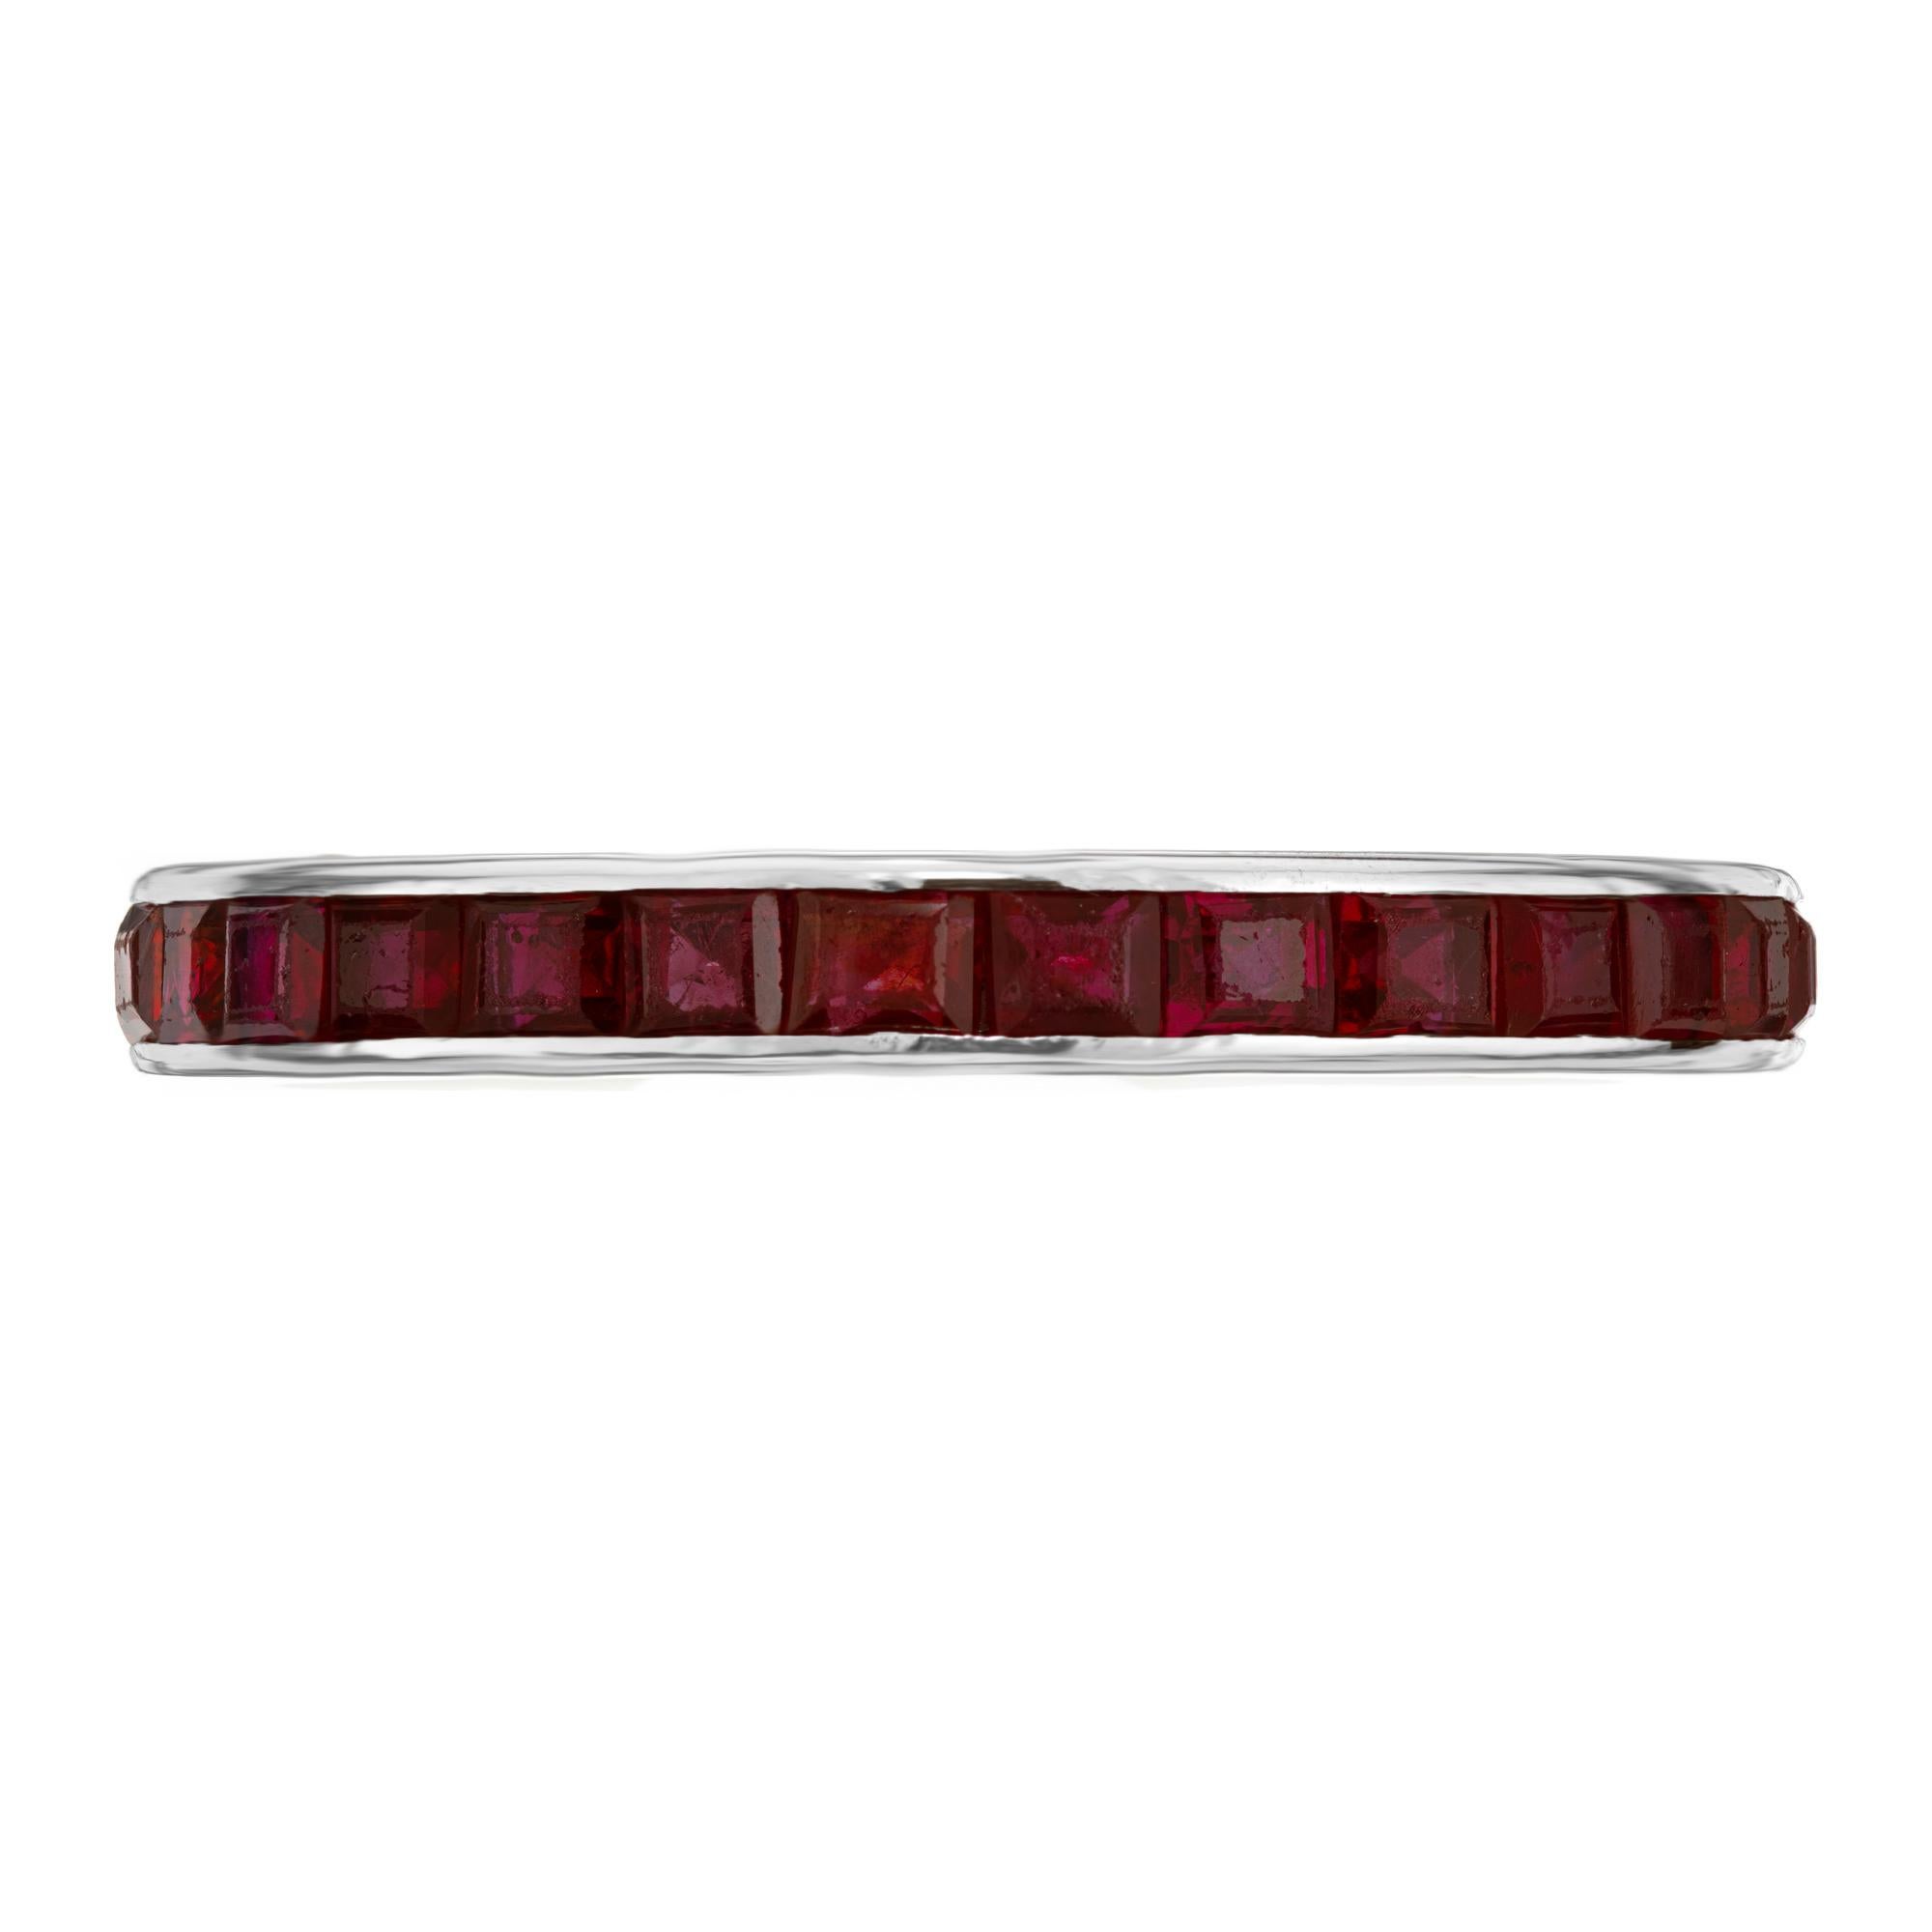 28 Square cut, channel set ruby platinum wedding band ring. This eternity wedding band boasts 28 square cut rubies totaling 2.80cts., that are set in a platinum mounting. The rubies are a rich deep red. A great alternative to a traditional band.